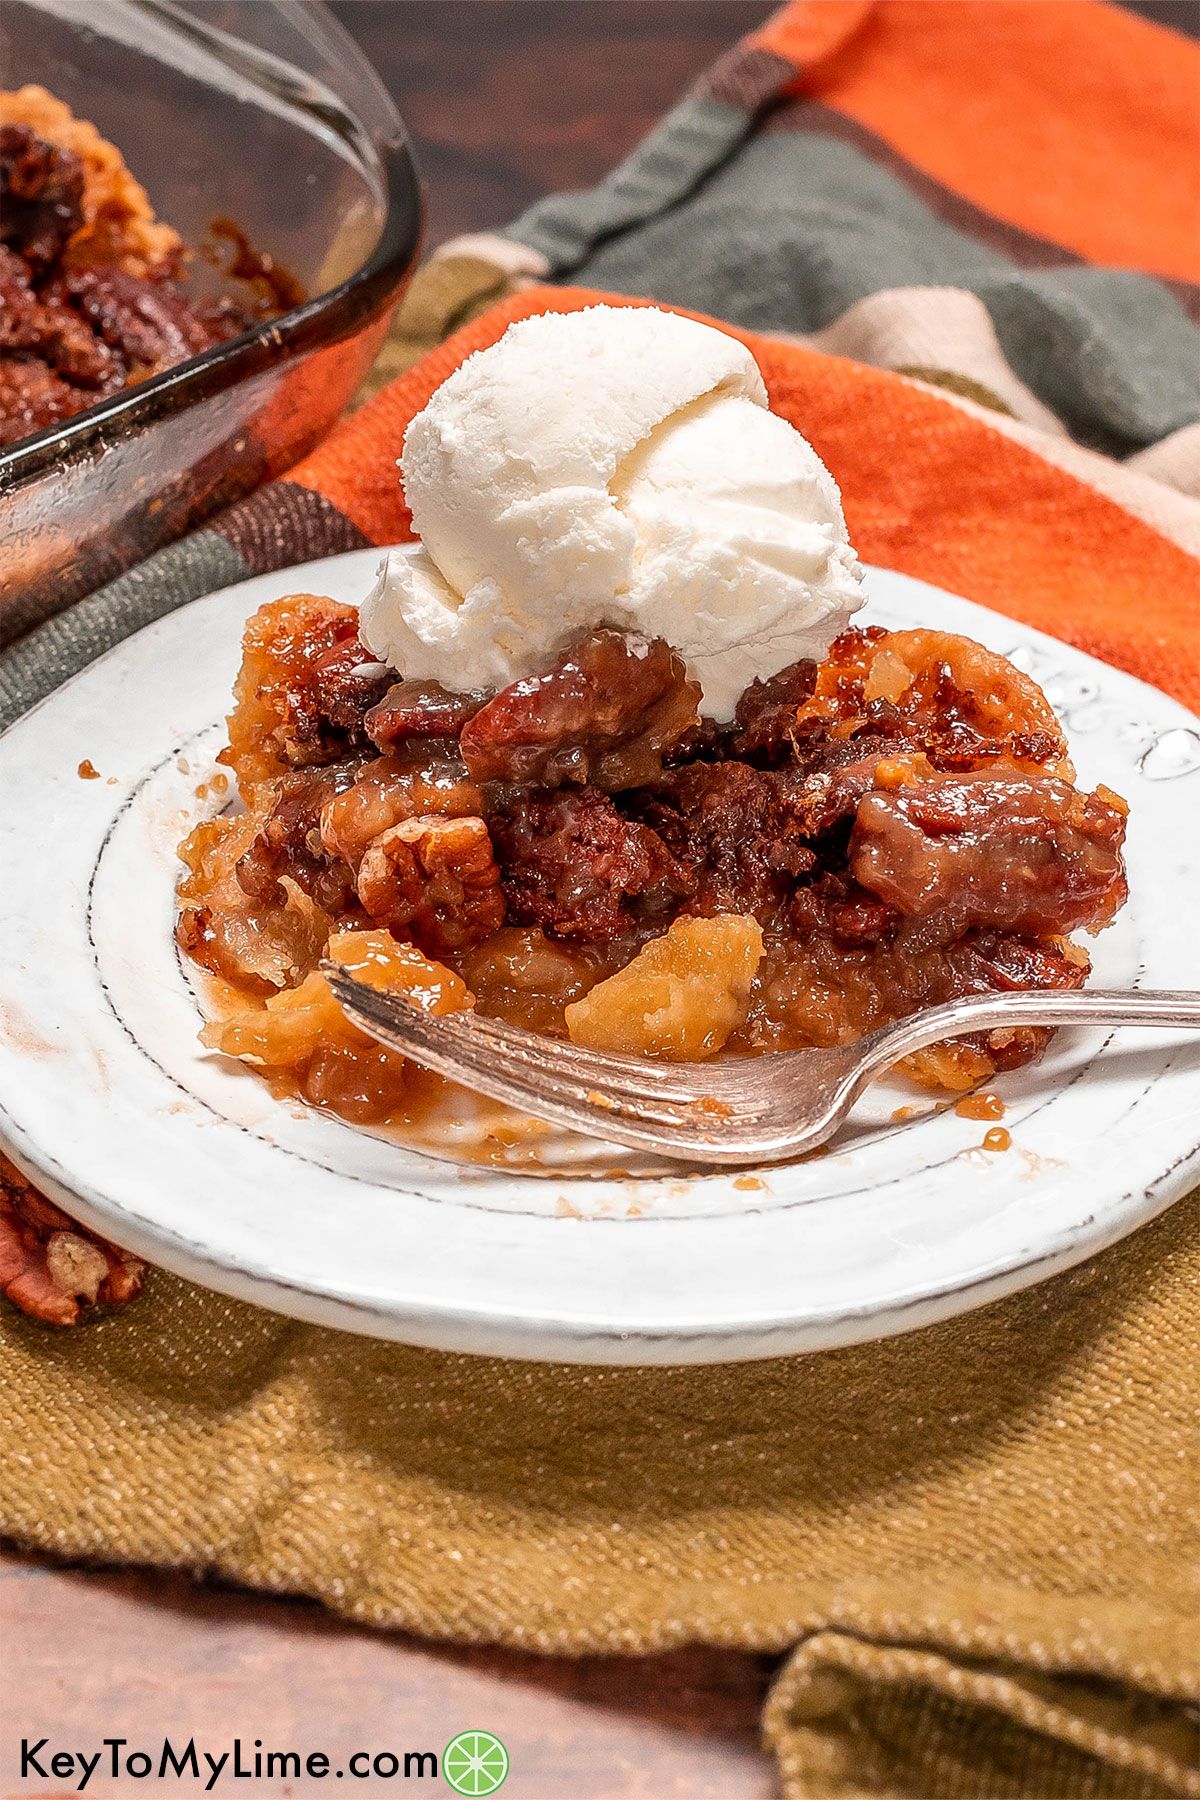 A side image of a serving of pecan cobbler topped with a scoop of ice cream on top of a white plate.